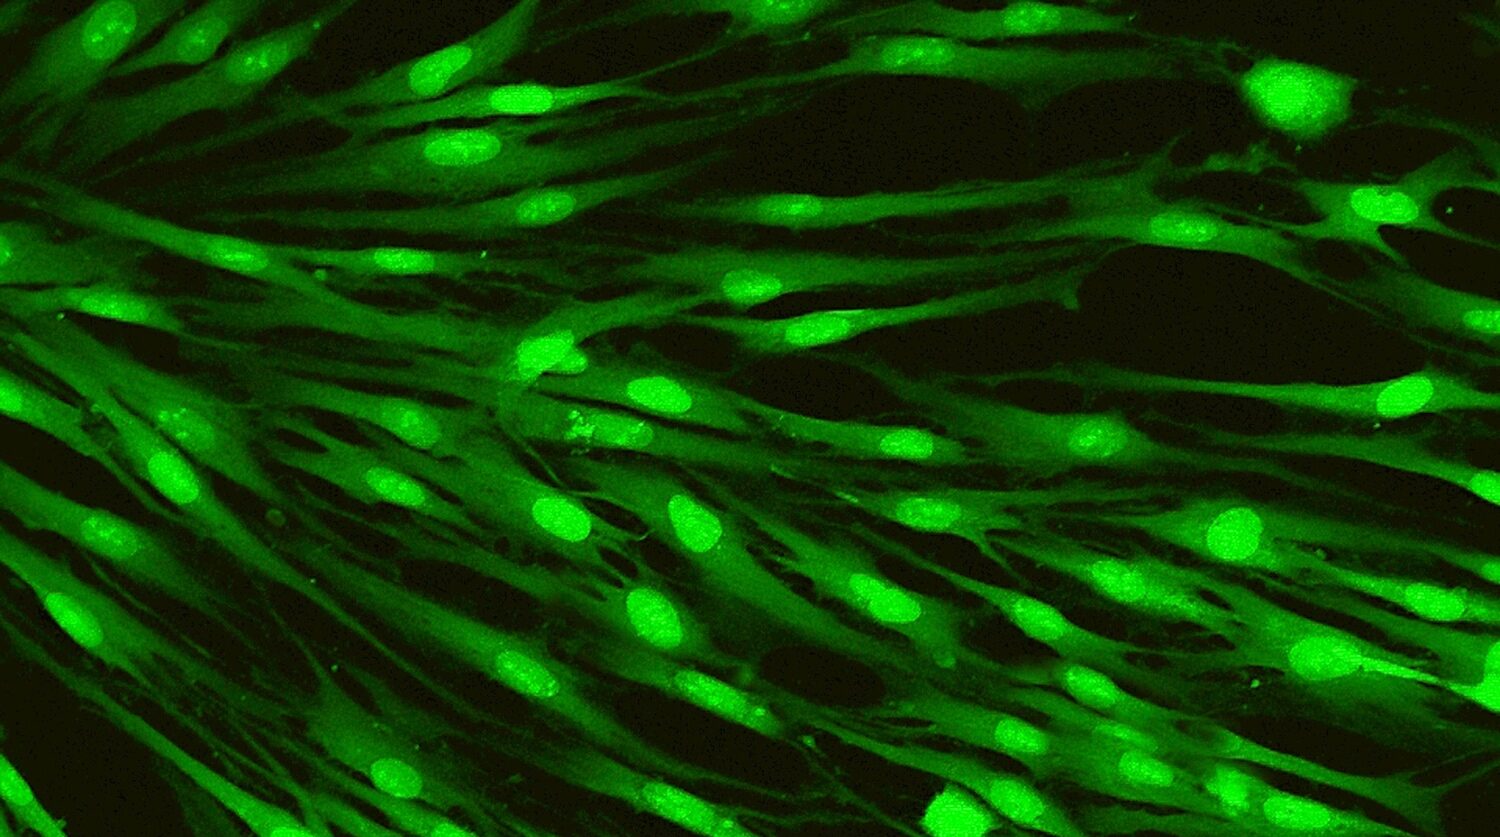 Wound Healing Fibroblast Dance Led by Fascia-Resident Progenitors